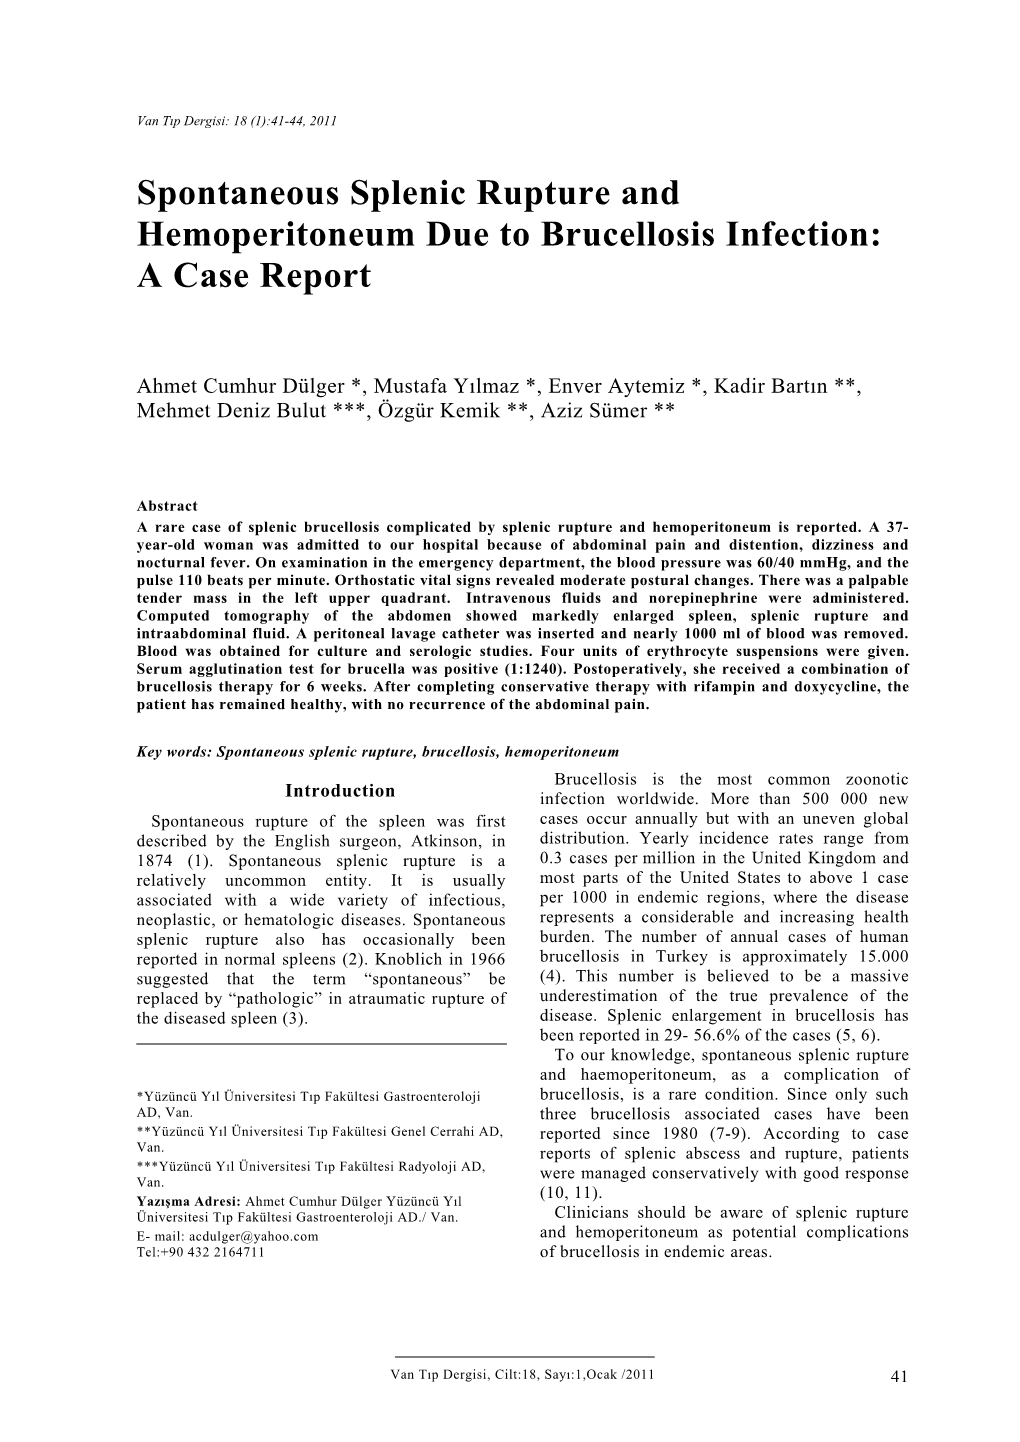 Spontaneous Splenic Rupture and Hemoperitoneum Due to Brucellosis Infection: a Case Report